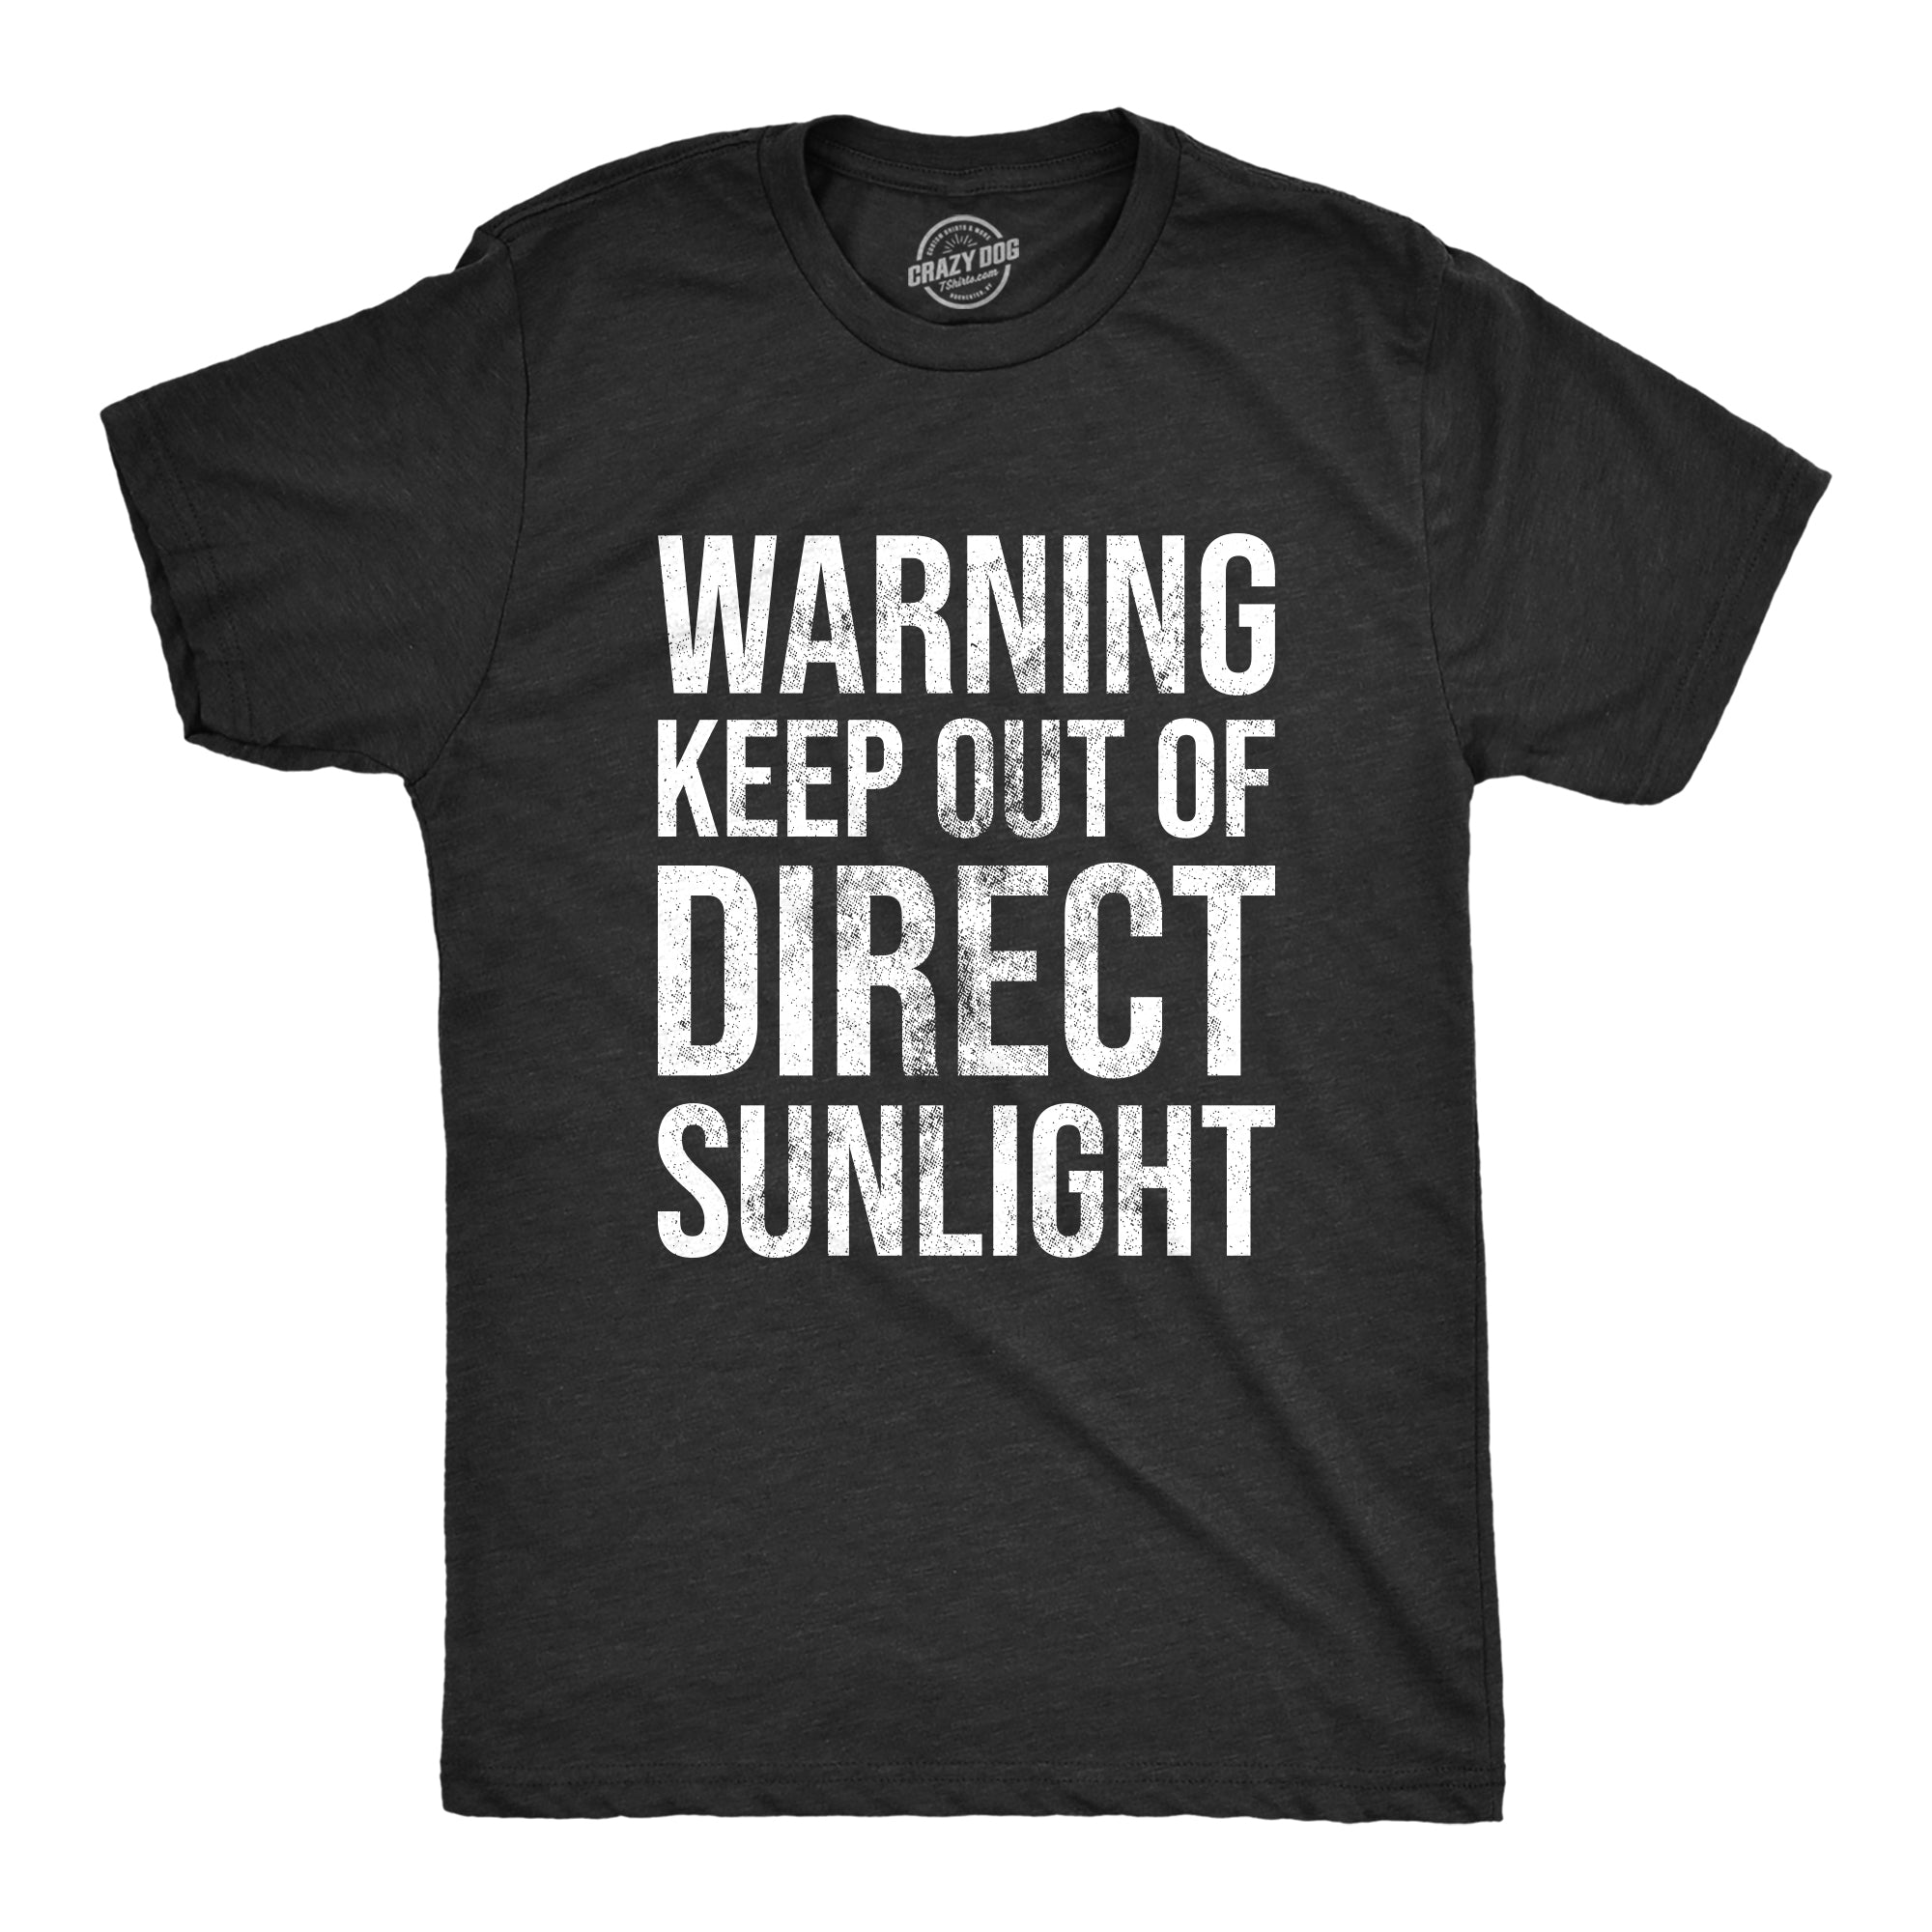 Funny Heather Black - SUNLIGHT Warning Keep Out Of Direct Sunlight Mens T Shirt Nerdy Vacation Tee